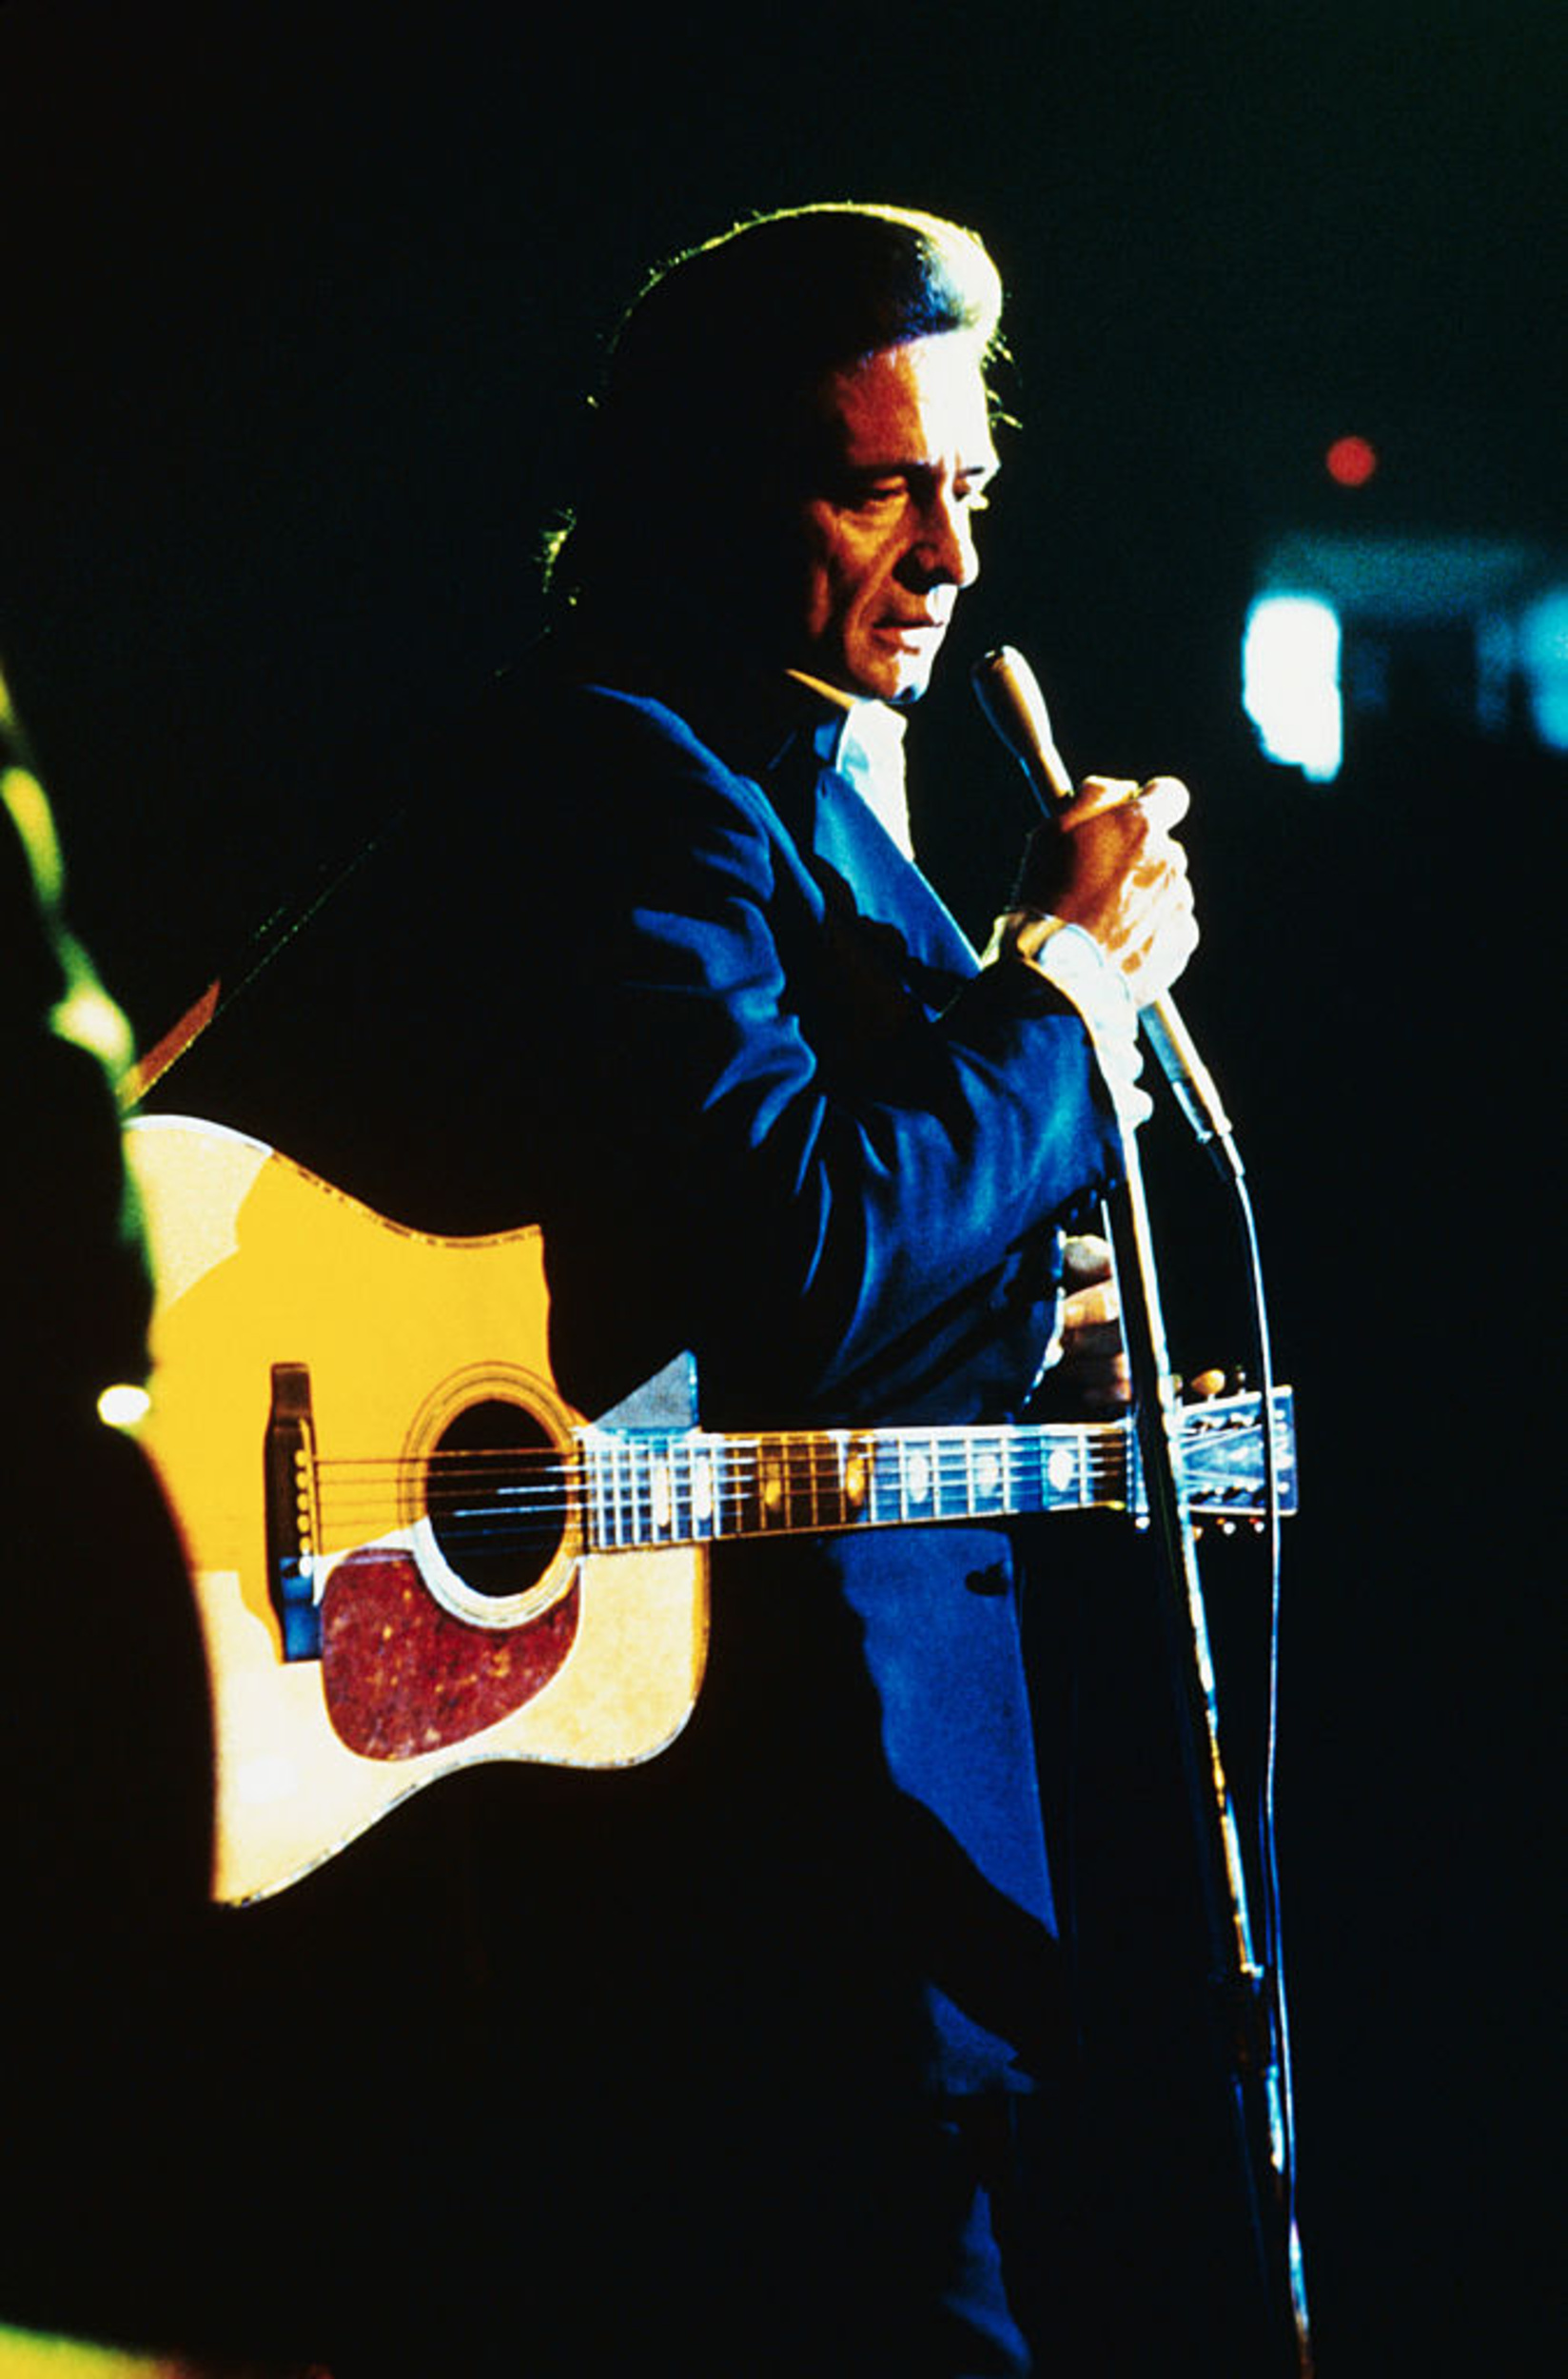 <p>Johnny Cash lists off too many American destinations to count in "I've Been Everywhere," making it an obvious addition to the soundtrack for a great American road trip. Even if you're not going to Dayton, Ohio or Tulsa, Oklahoma, the appeal of this song is totally universal. </p><p>You may also like: <a href='https://www.yardbarker.com/entertainment/articles/popular_books_that_were_made_into_terrible_movies/s1__29971472'>Popular books that were made into terrible movies</a></p>